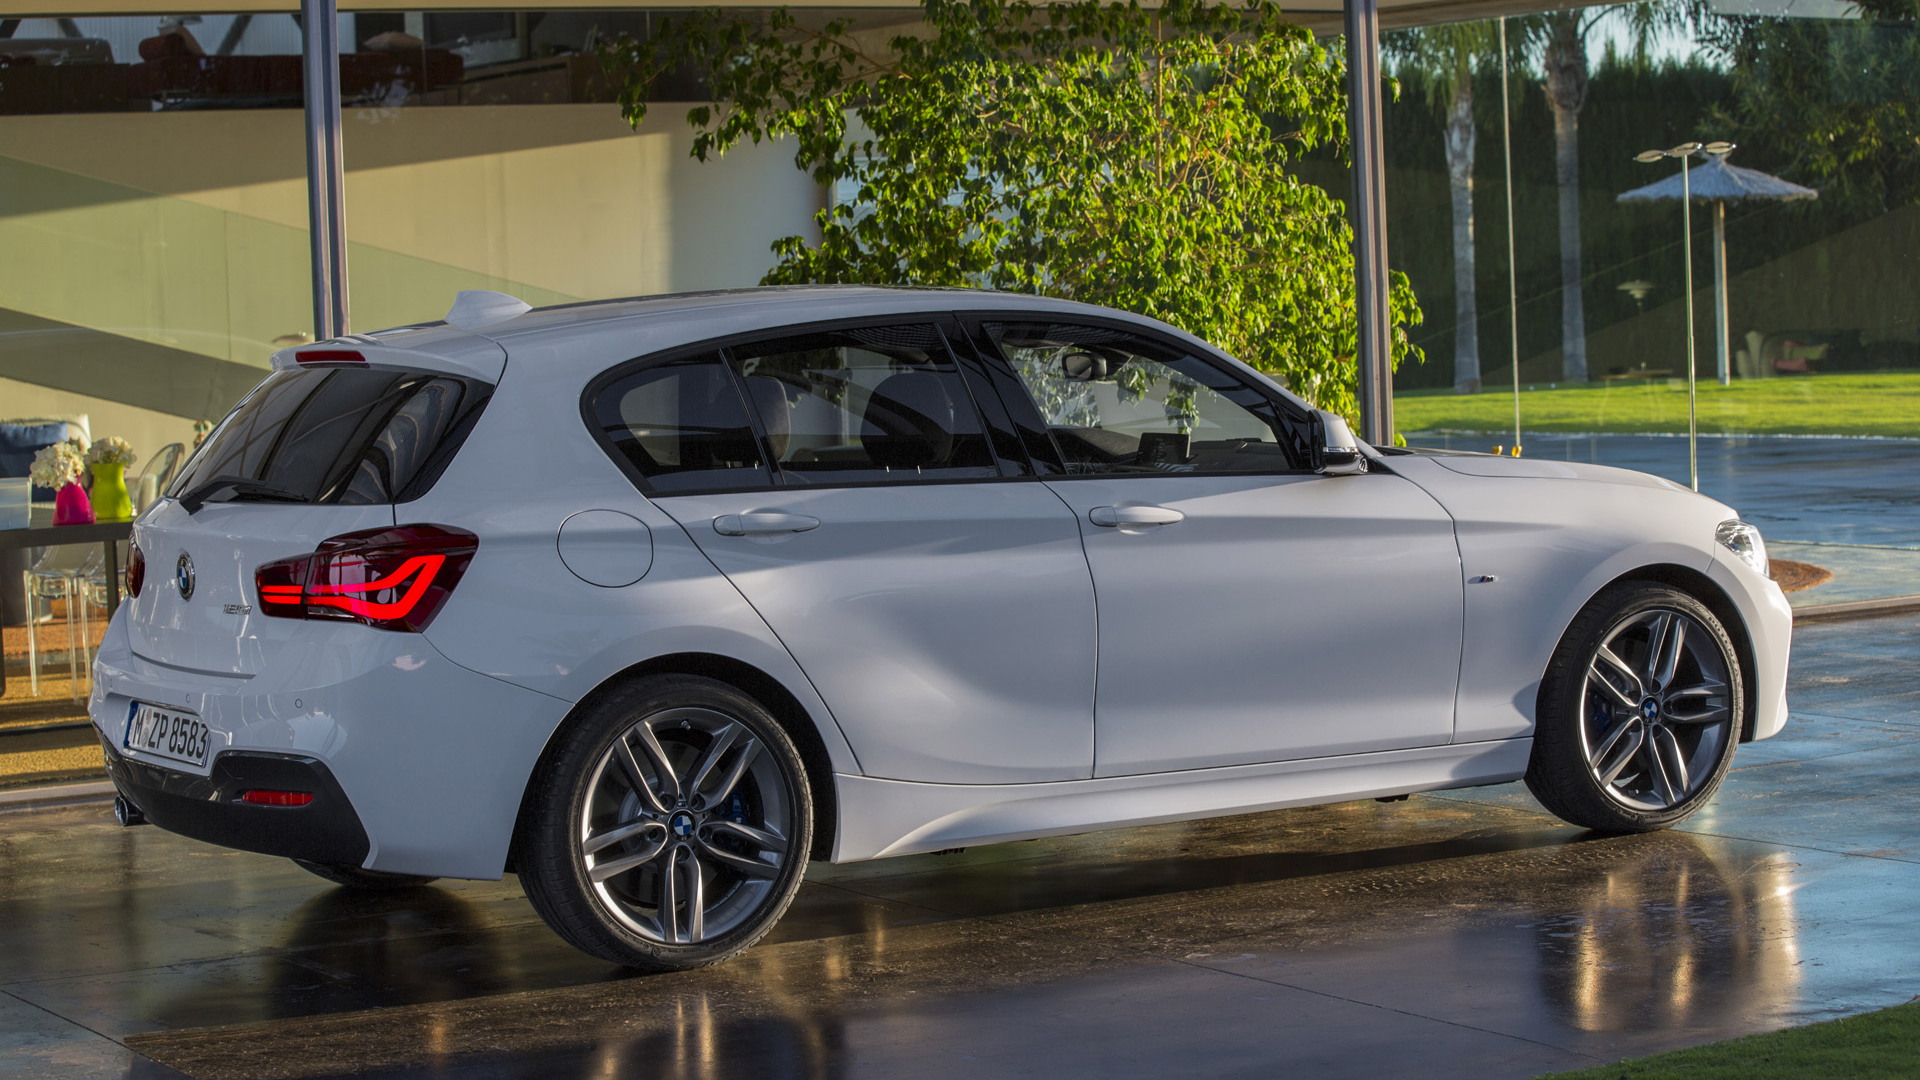 2015 BMW 1-Series Hatchback equipped with M Sport package